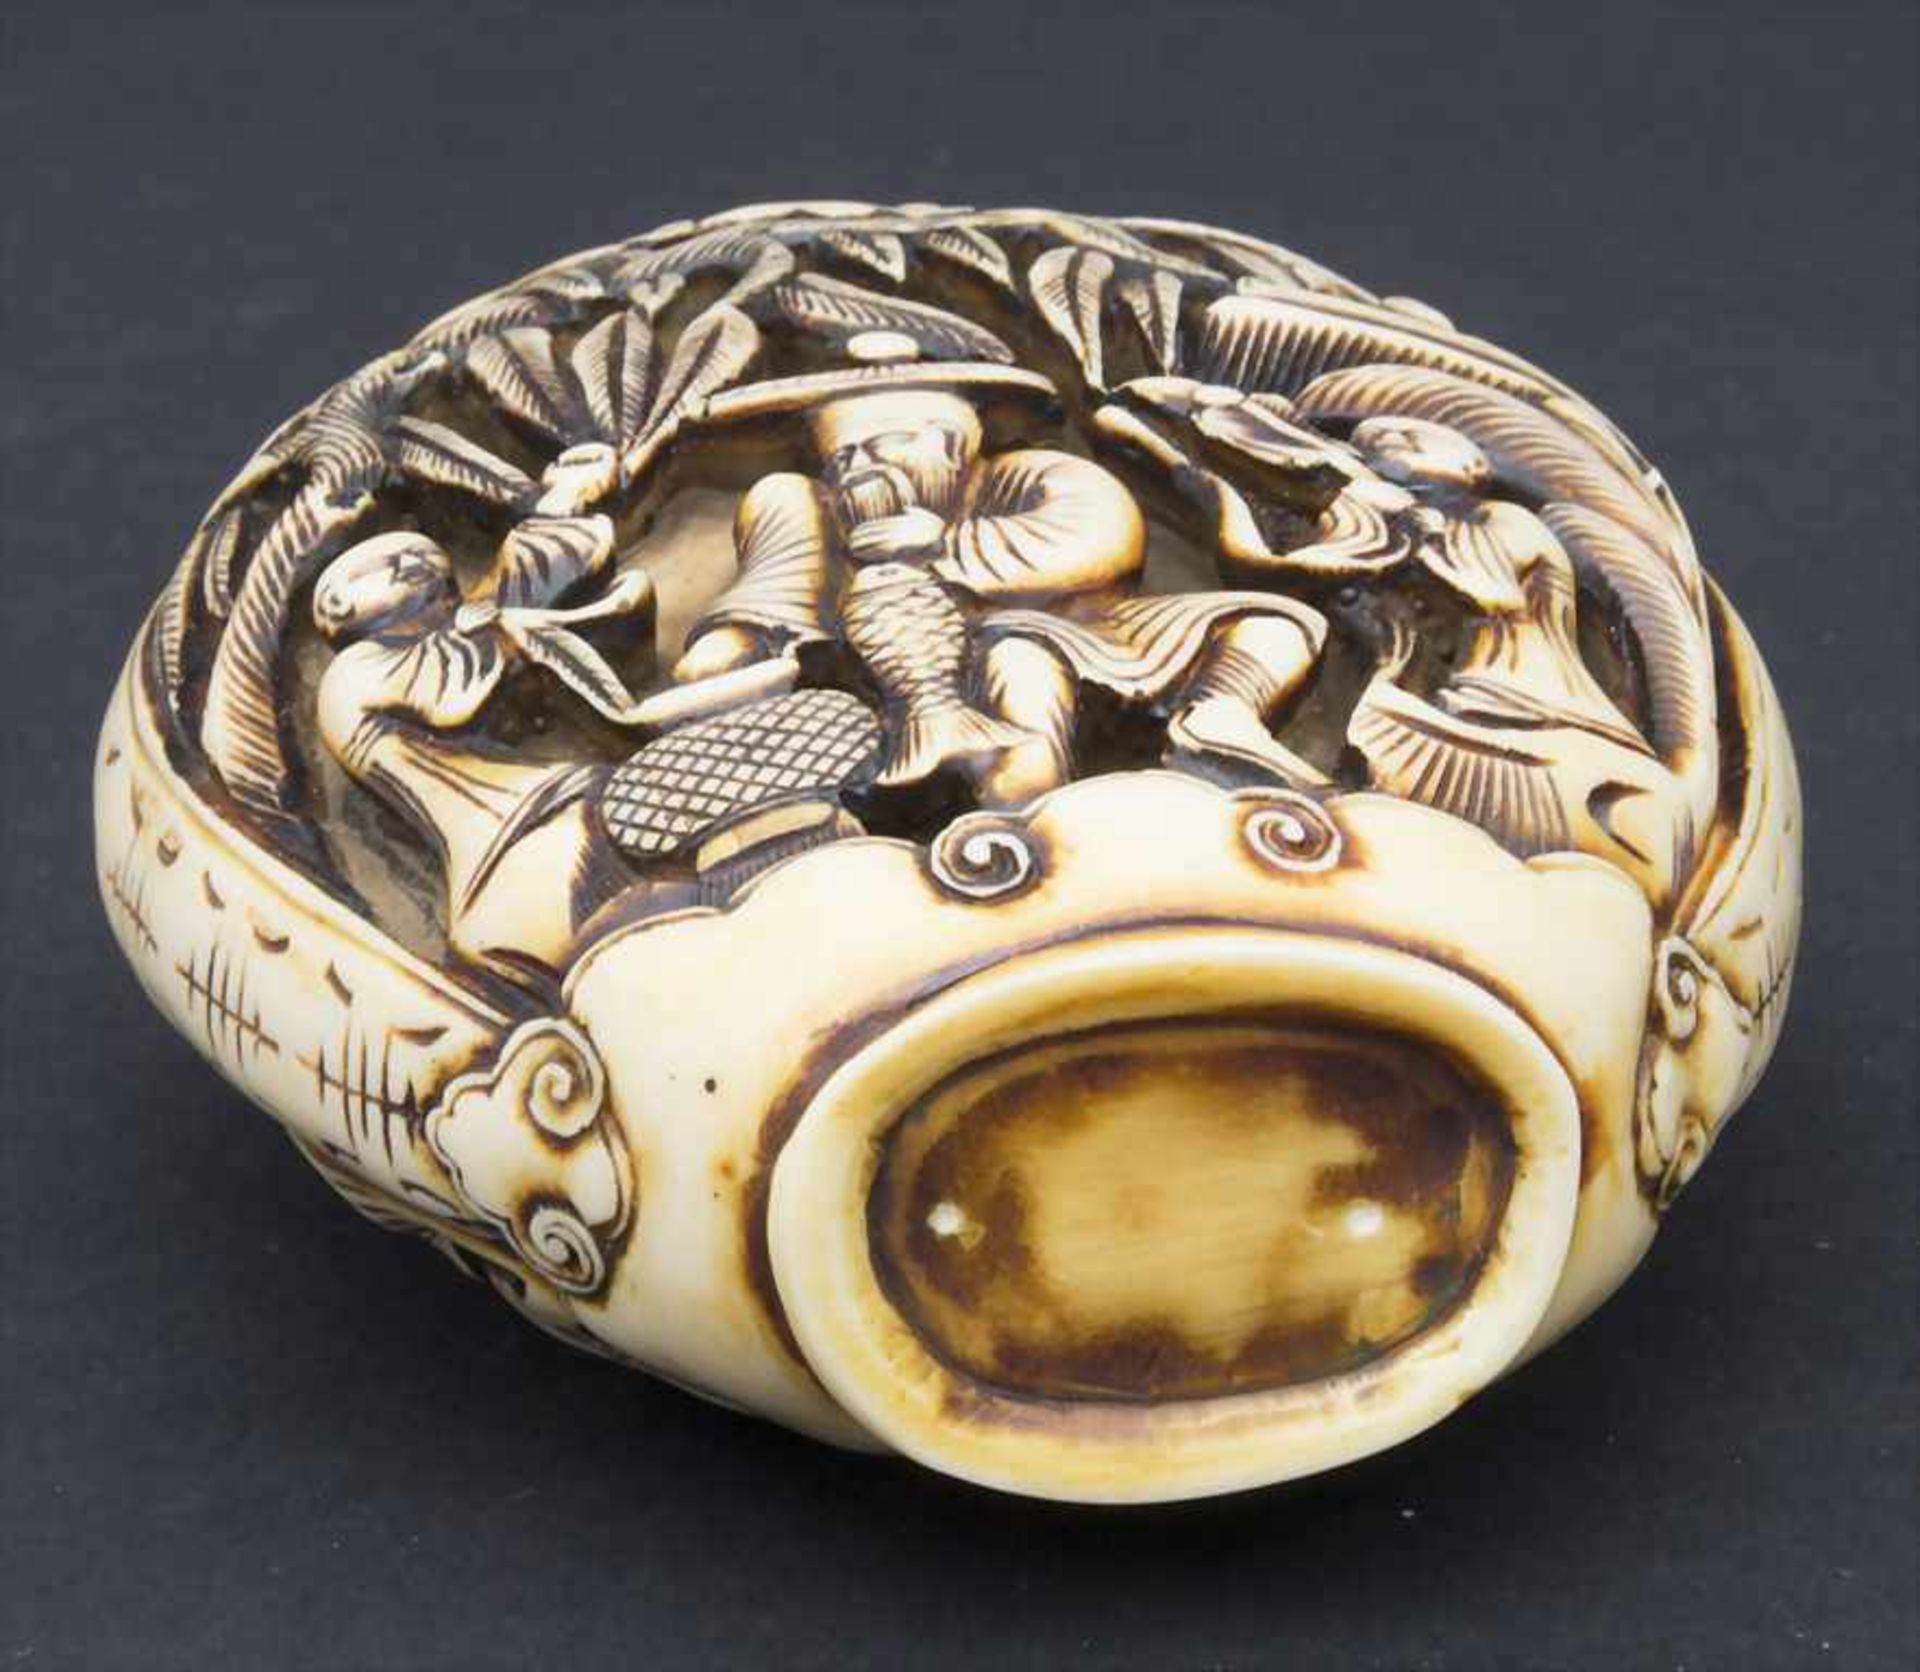 Snuffbottle mit Figurendekor / A snuff bottle with figural scenes, China, un 1900 - Image 6 of 7